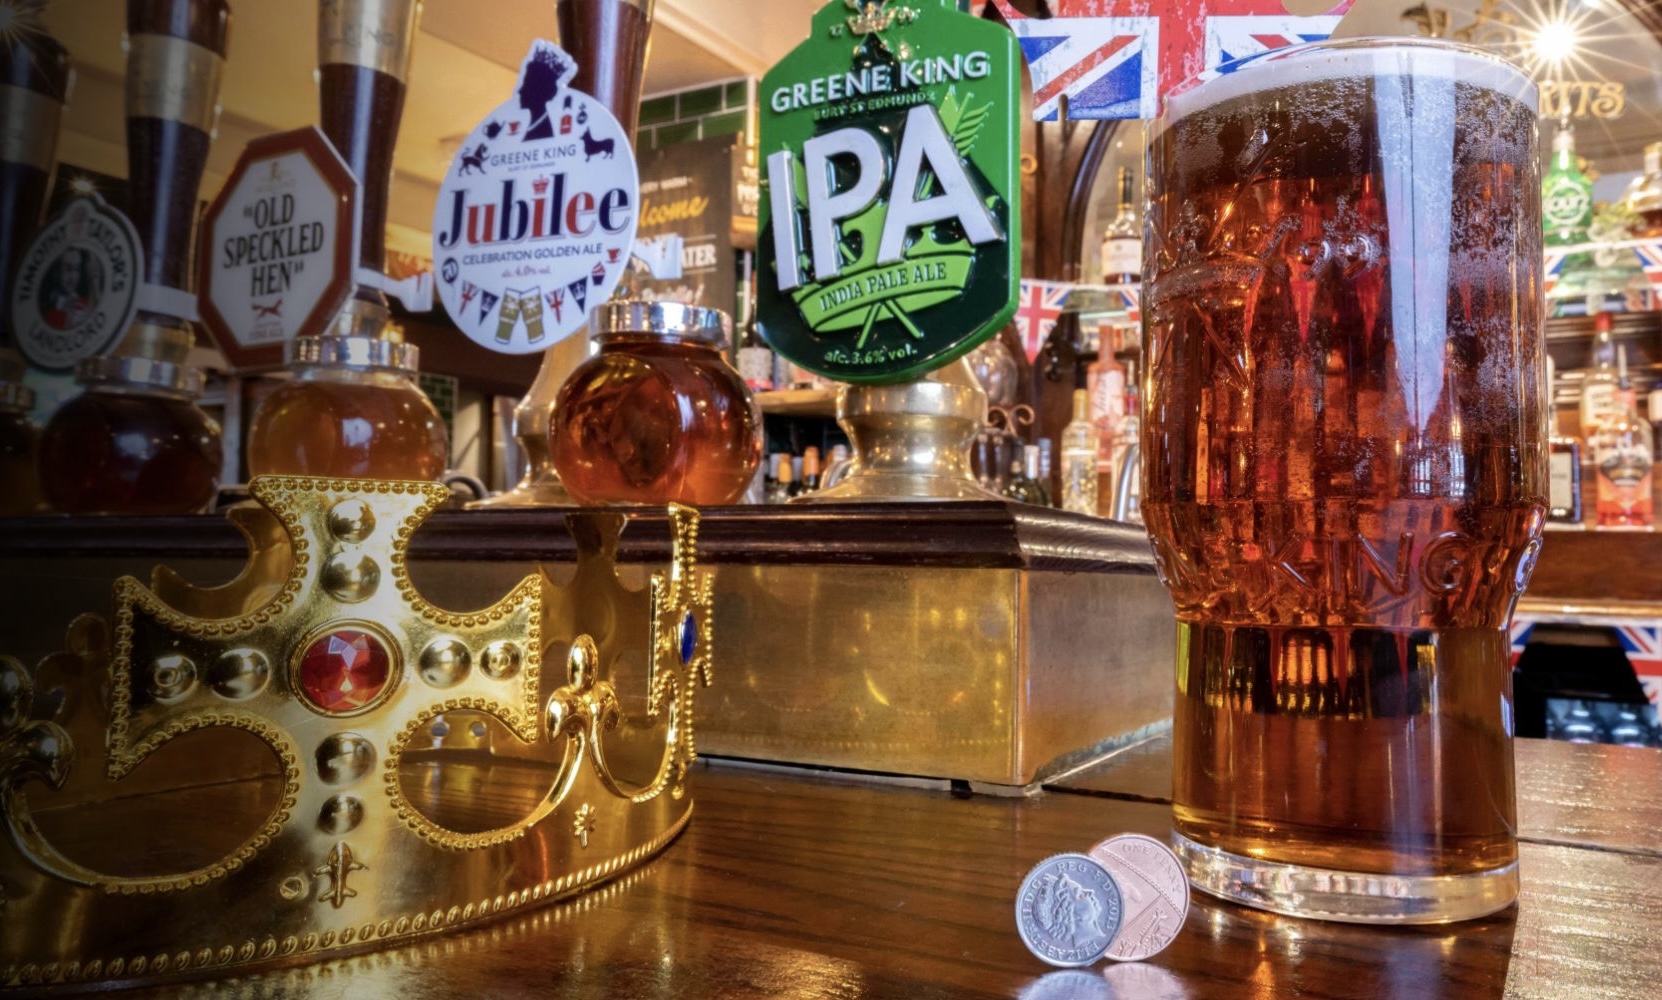 NEWS | A number of pubs in Hereford will be offering pints for just 6p tomorrow to kick off Jubilee week